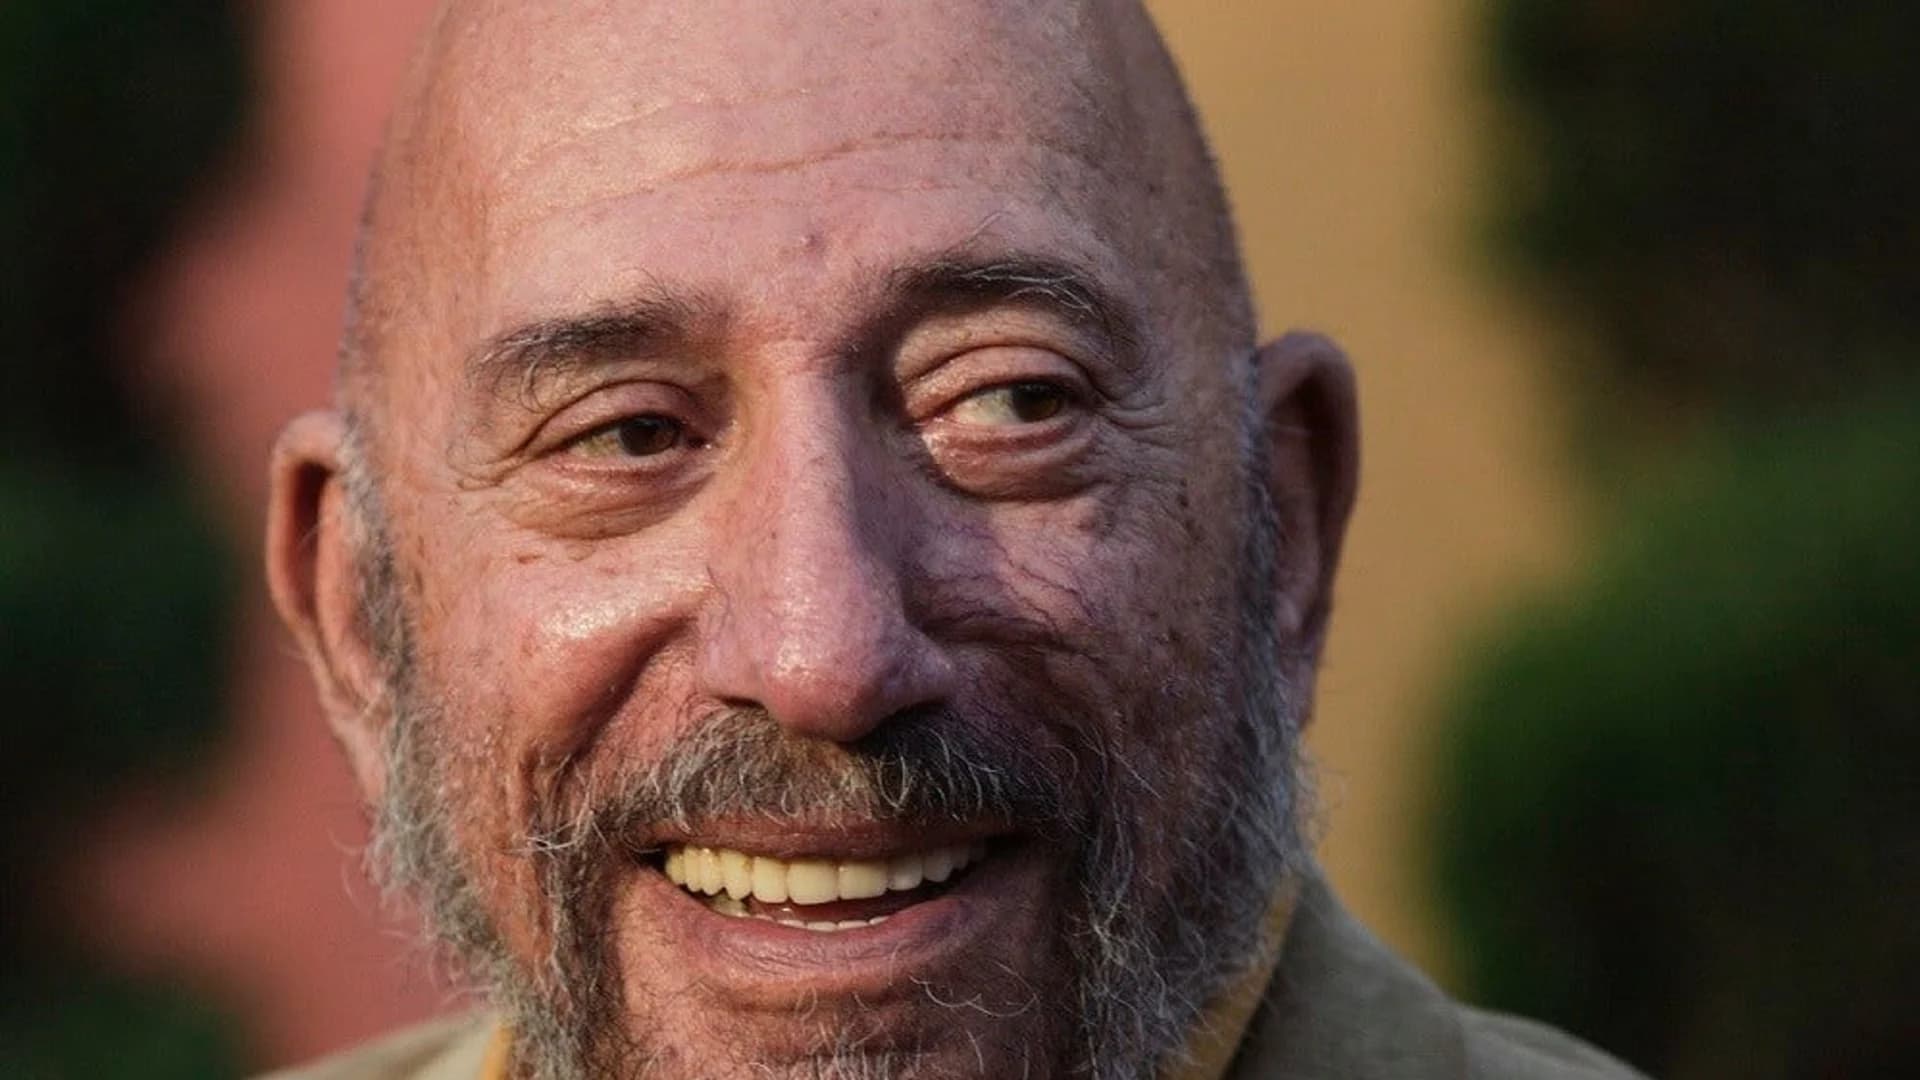 Horror movie icon Sid Haig, who acted in 'House of 1000 Corpses,' dies at 80